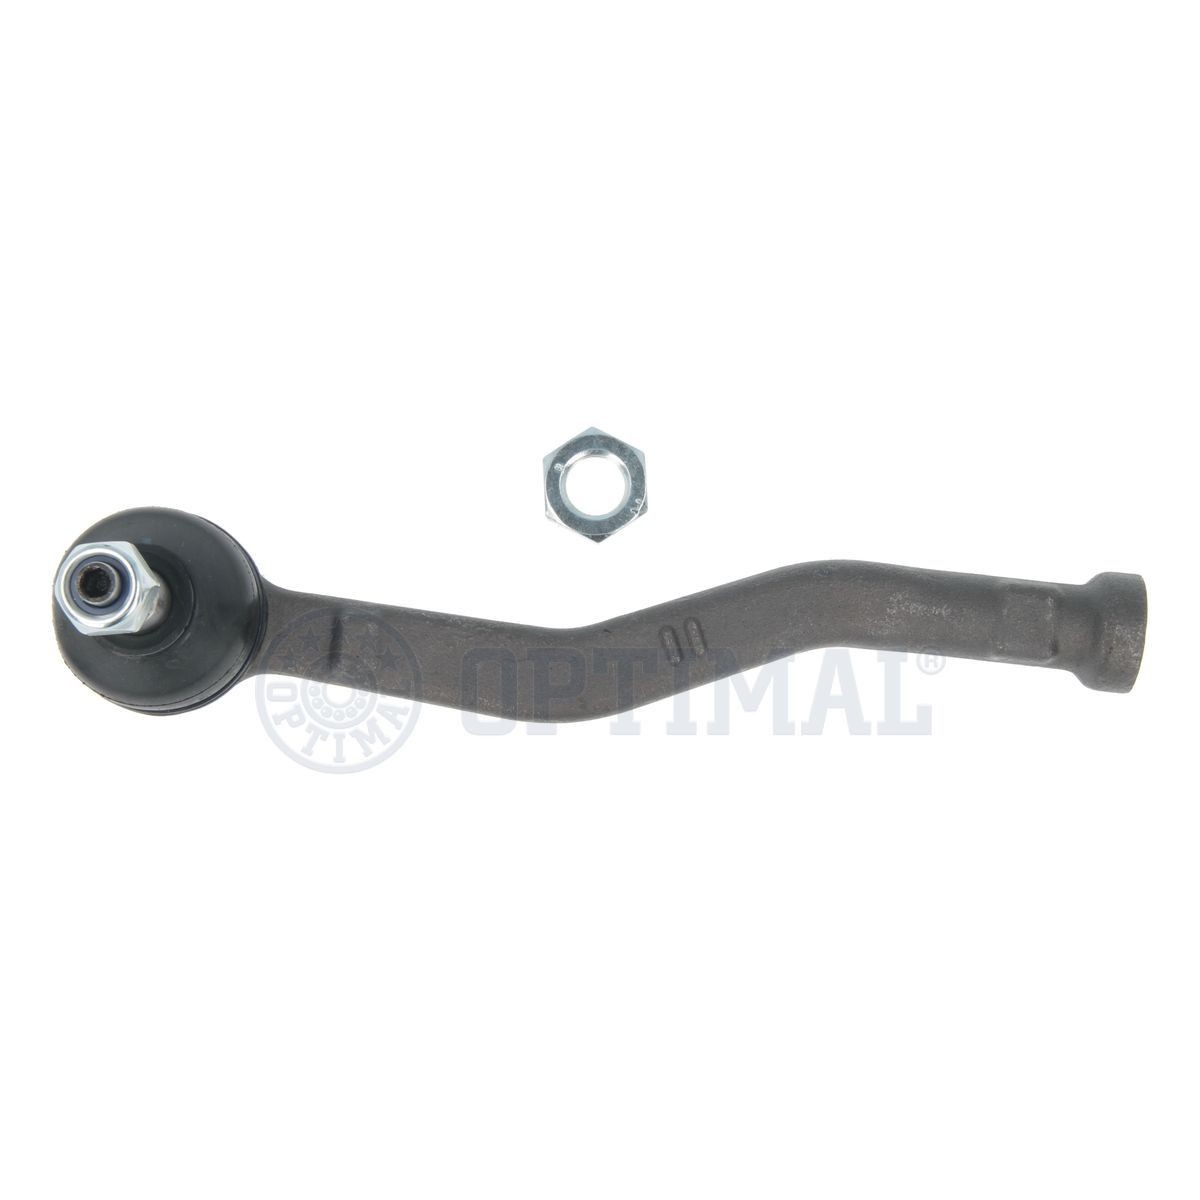 G1-2011 OPTIMAL Tie rod end CITROËN M10 x 1,25 RHT M mm, Front Axle Right, outer